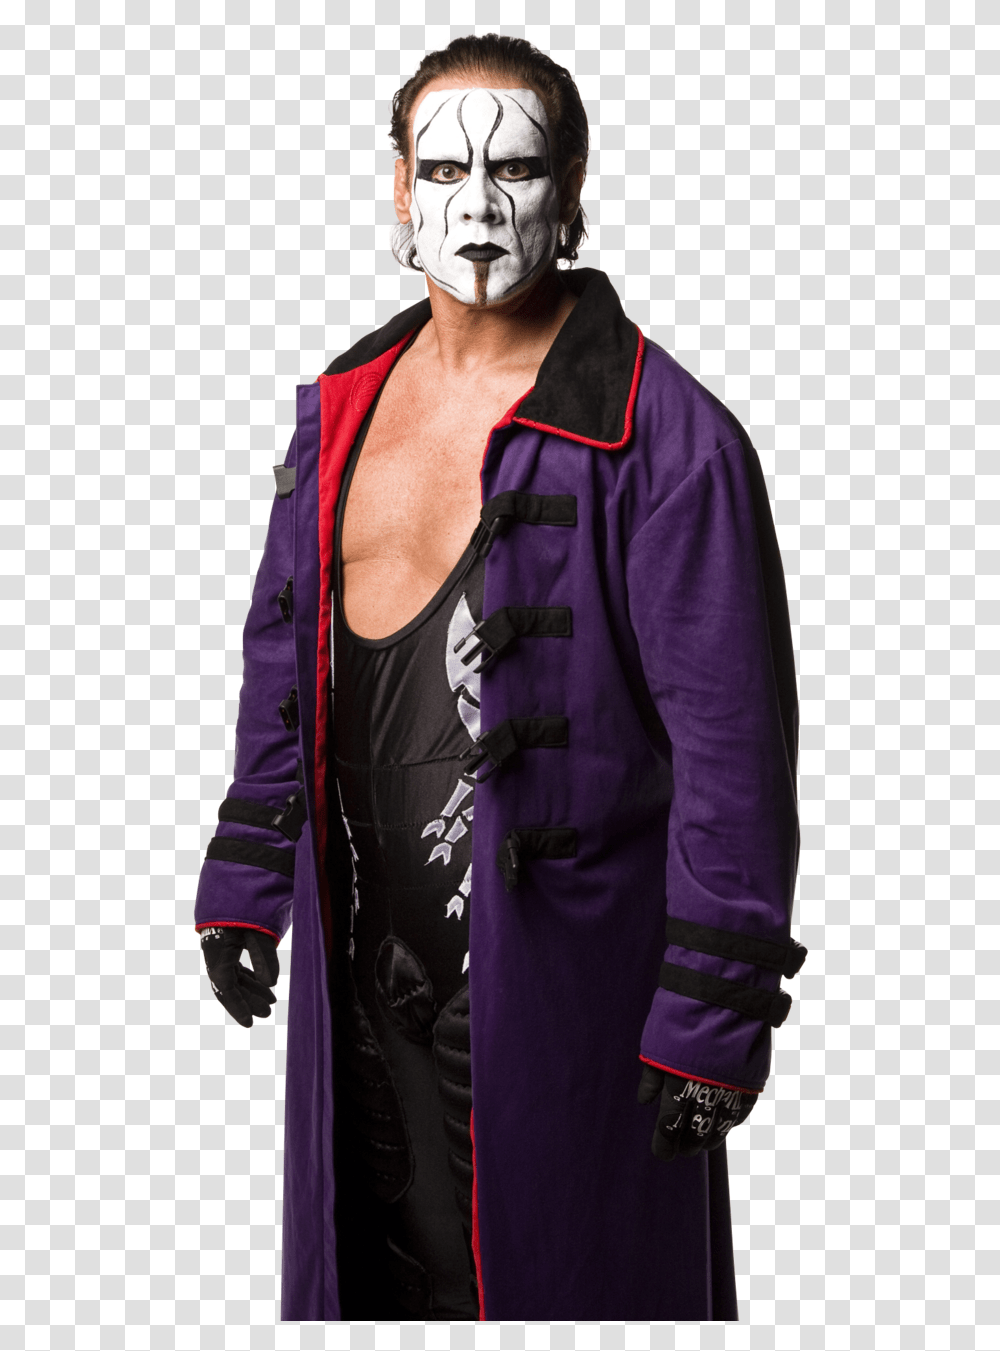 Sting 7 Image Tna Sting, Clothing, Sleeve, Person, Coat Transparent Png